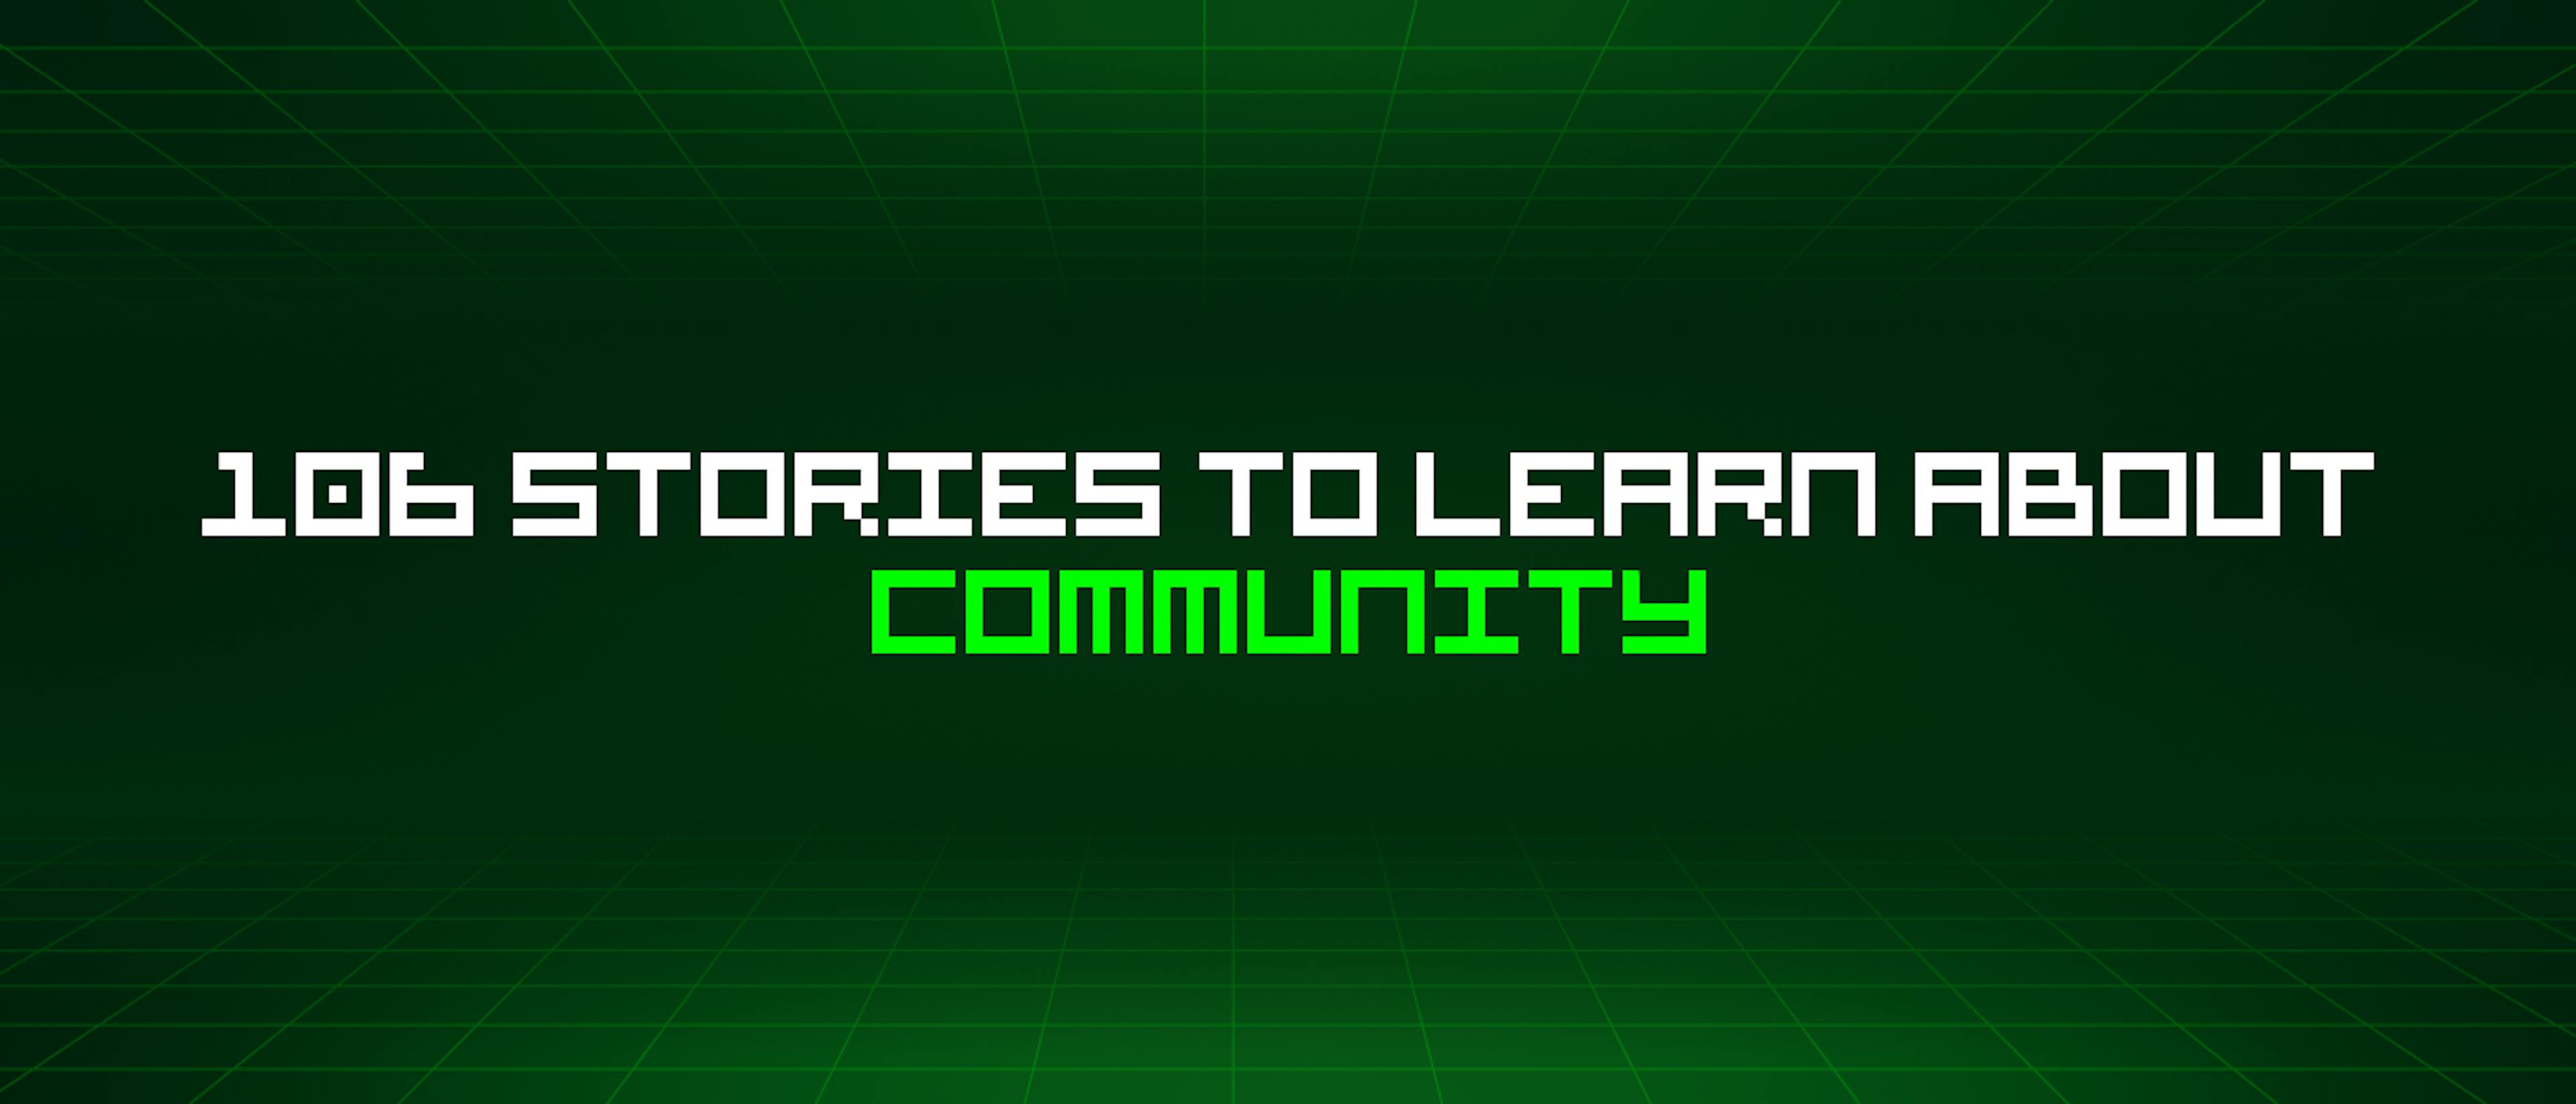 featured image - 106 Stories To Learn About Community